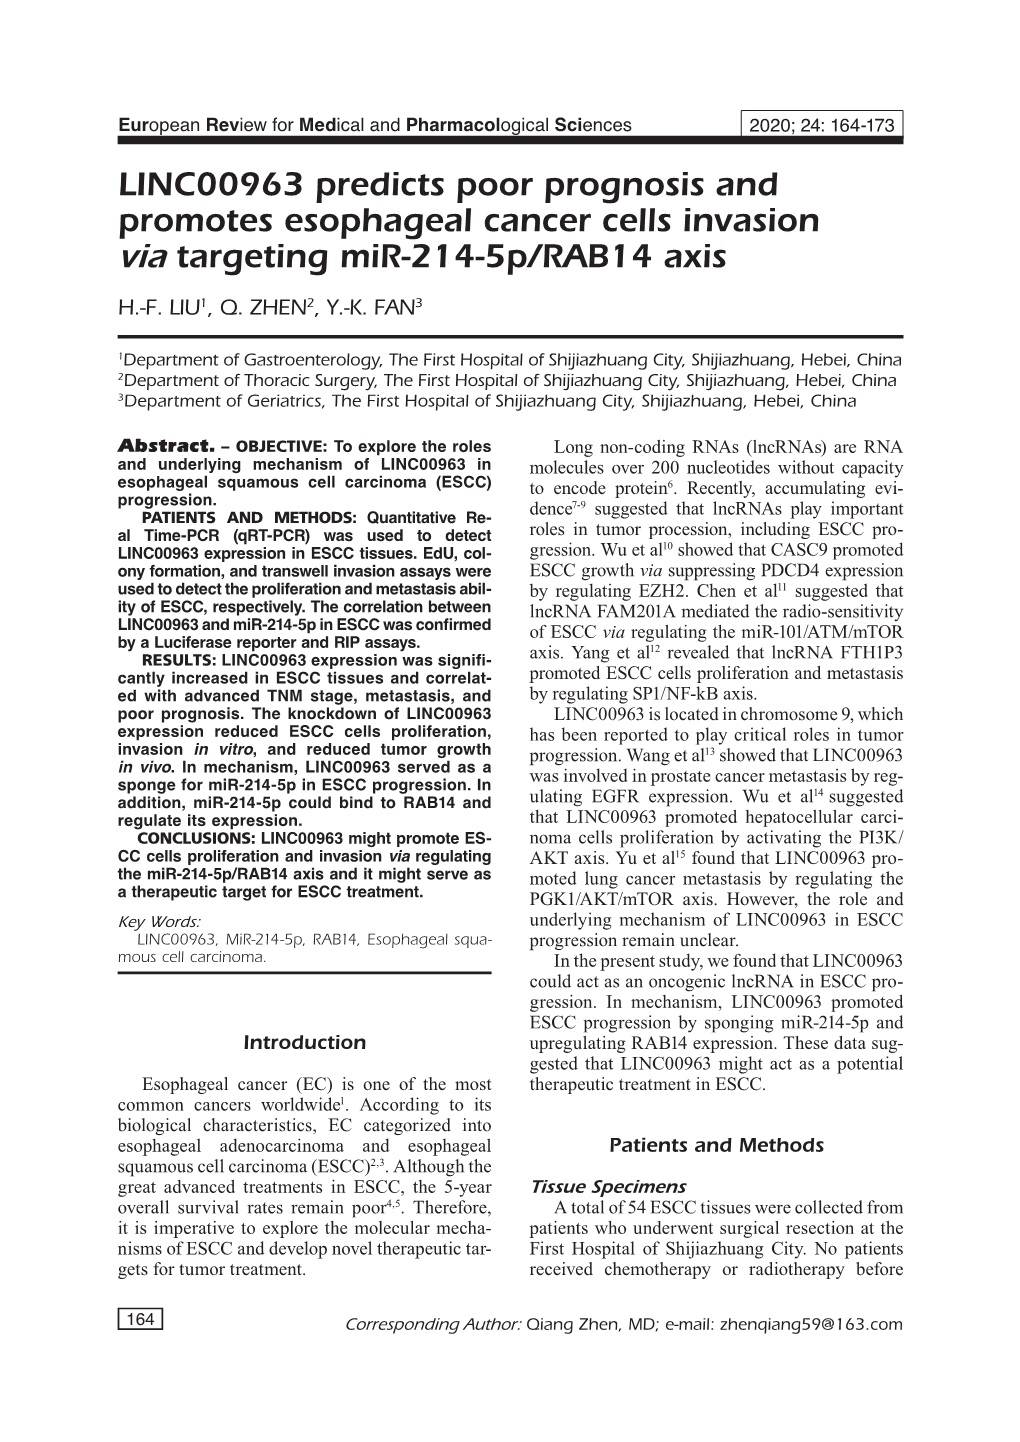 LINC00963 Predicts Poor Prognosis and Promotes Esophageal Cancer Cells Invasion Via Targeting Mir-214-5P/RAB14 Axis H.-F